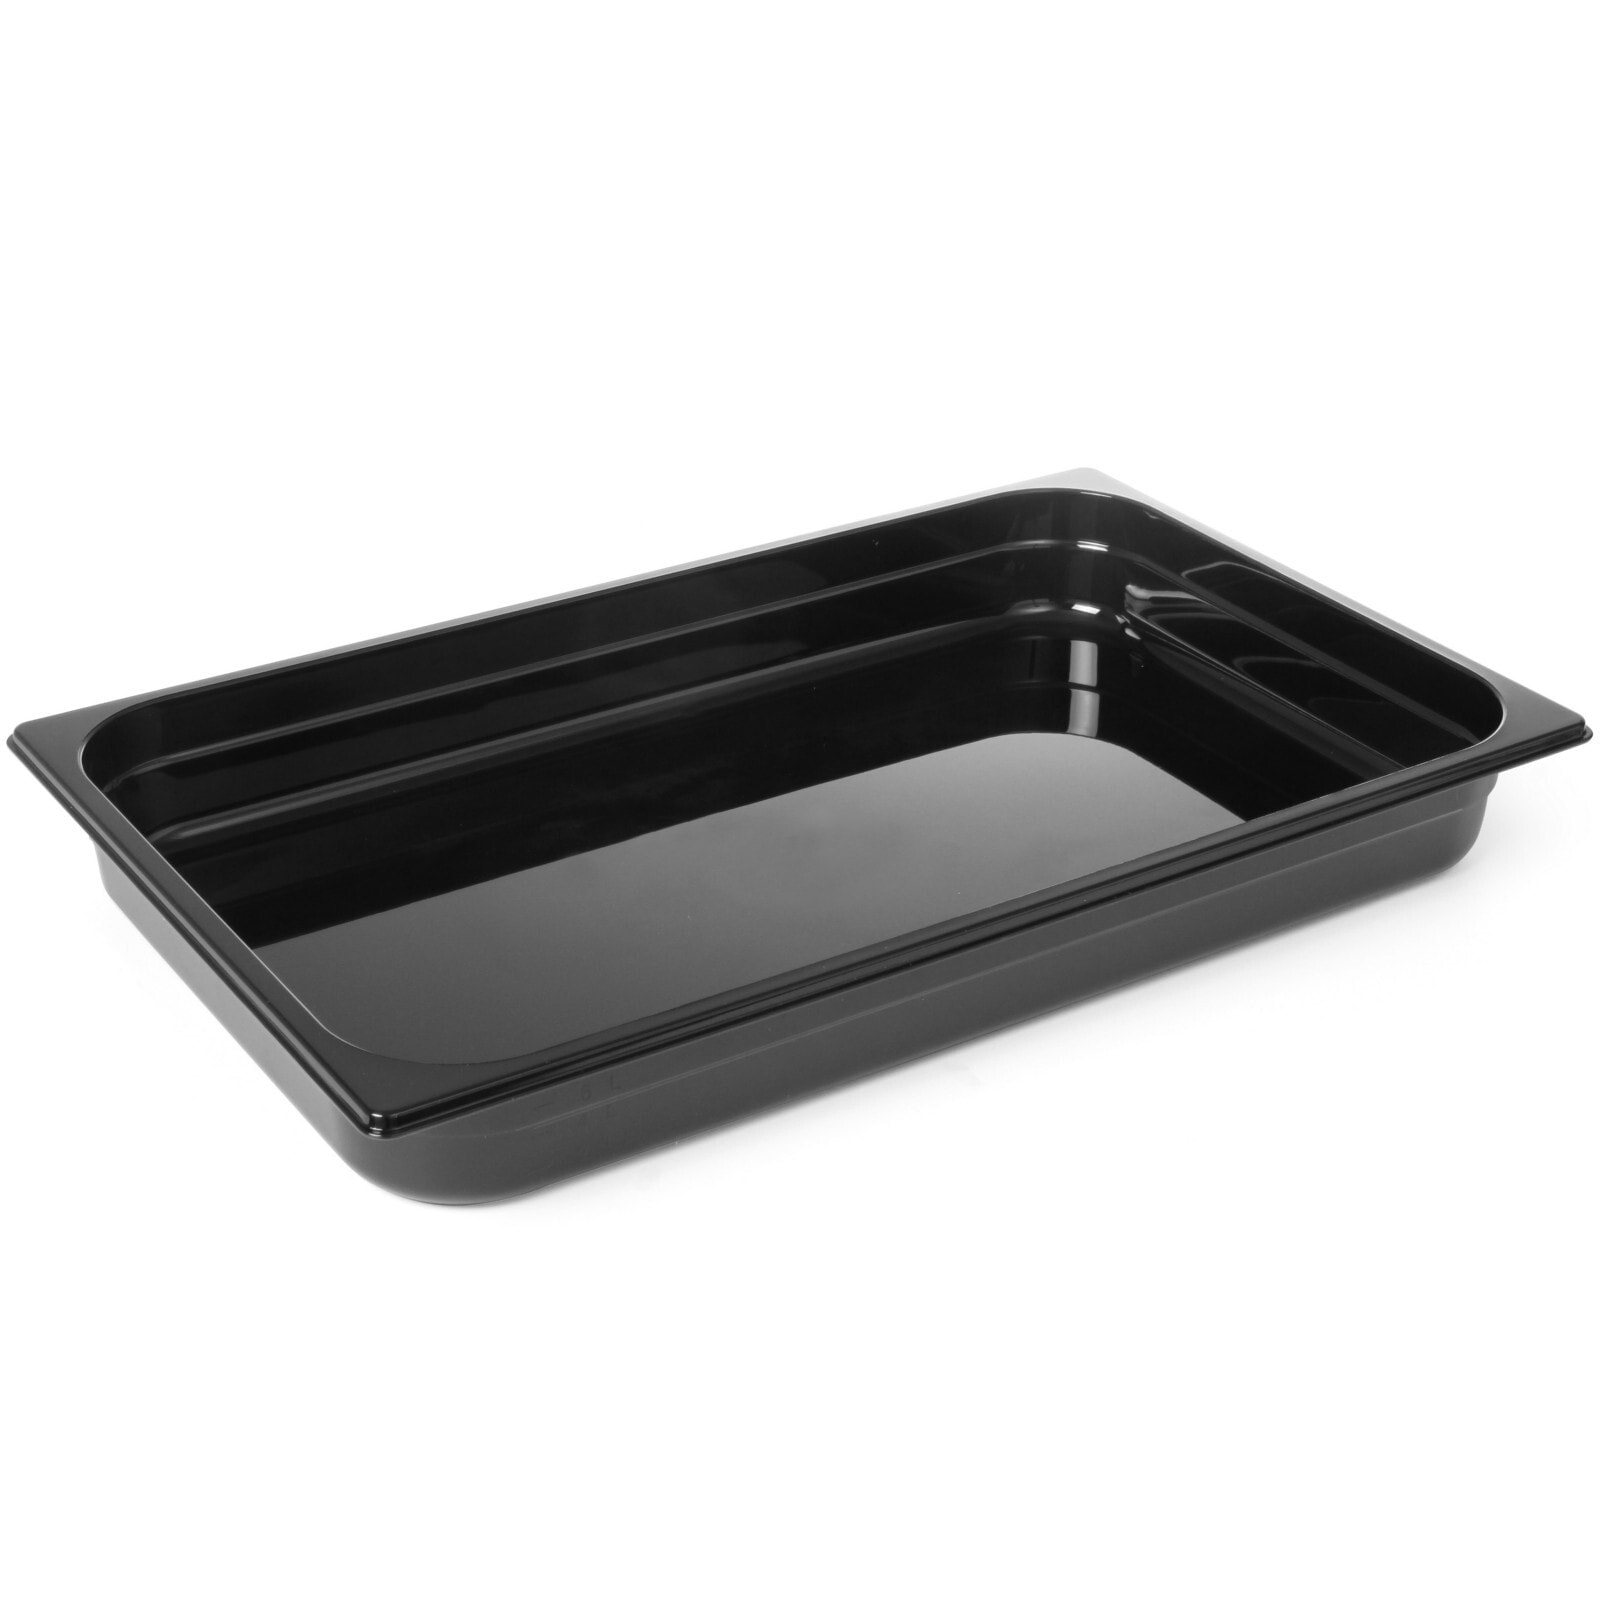 Gastronomy container GN 1/1 made of black polycarbonate 530x325x100mm 14L Hendi 862223